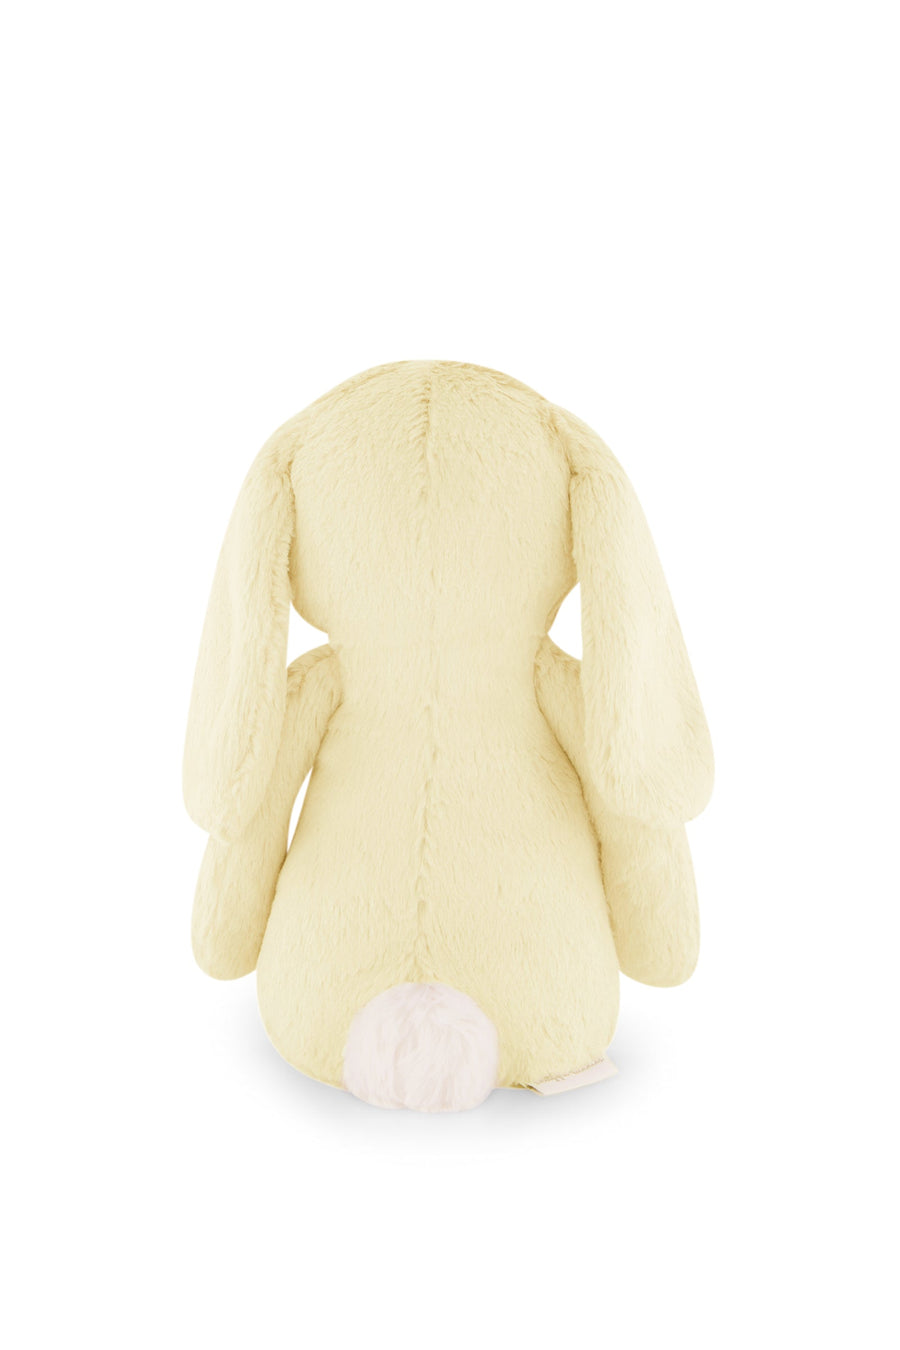 Snuggle Bunnies - Penelope the Bunny - Anise Childrens Toy from Jamie Kay USA